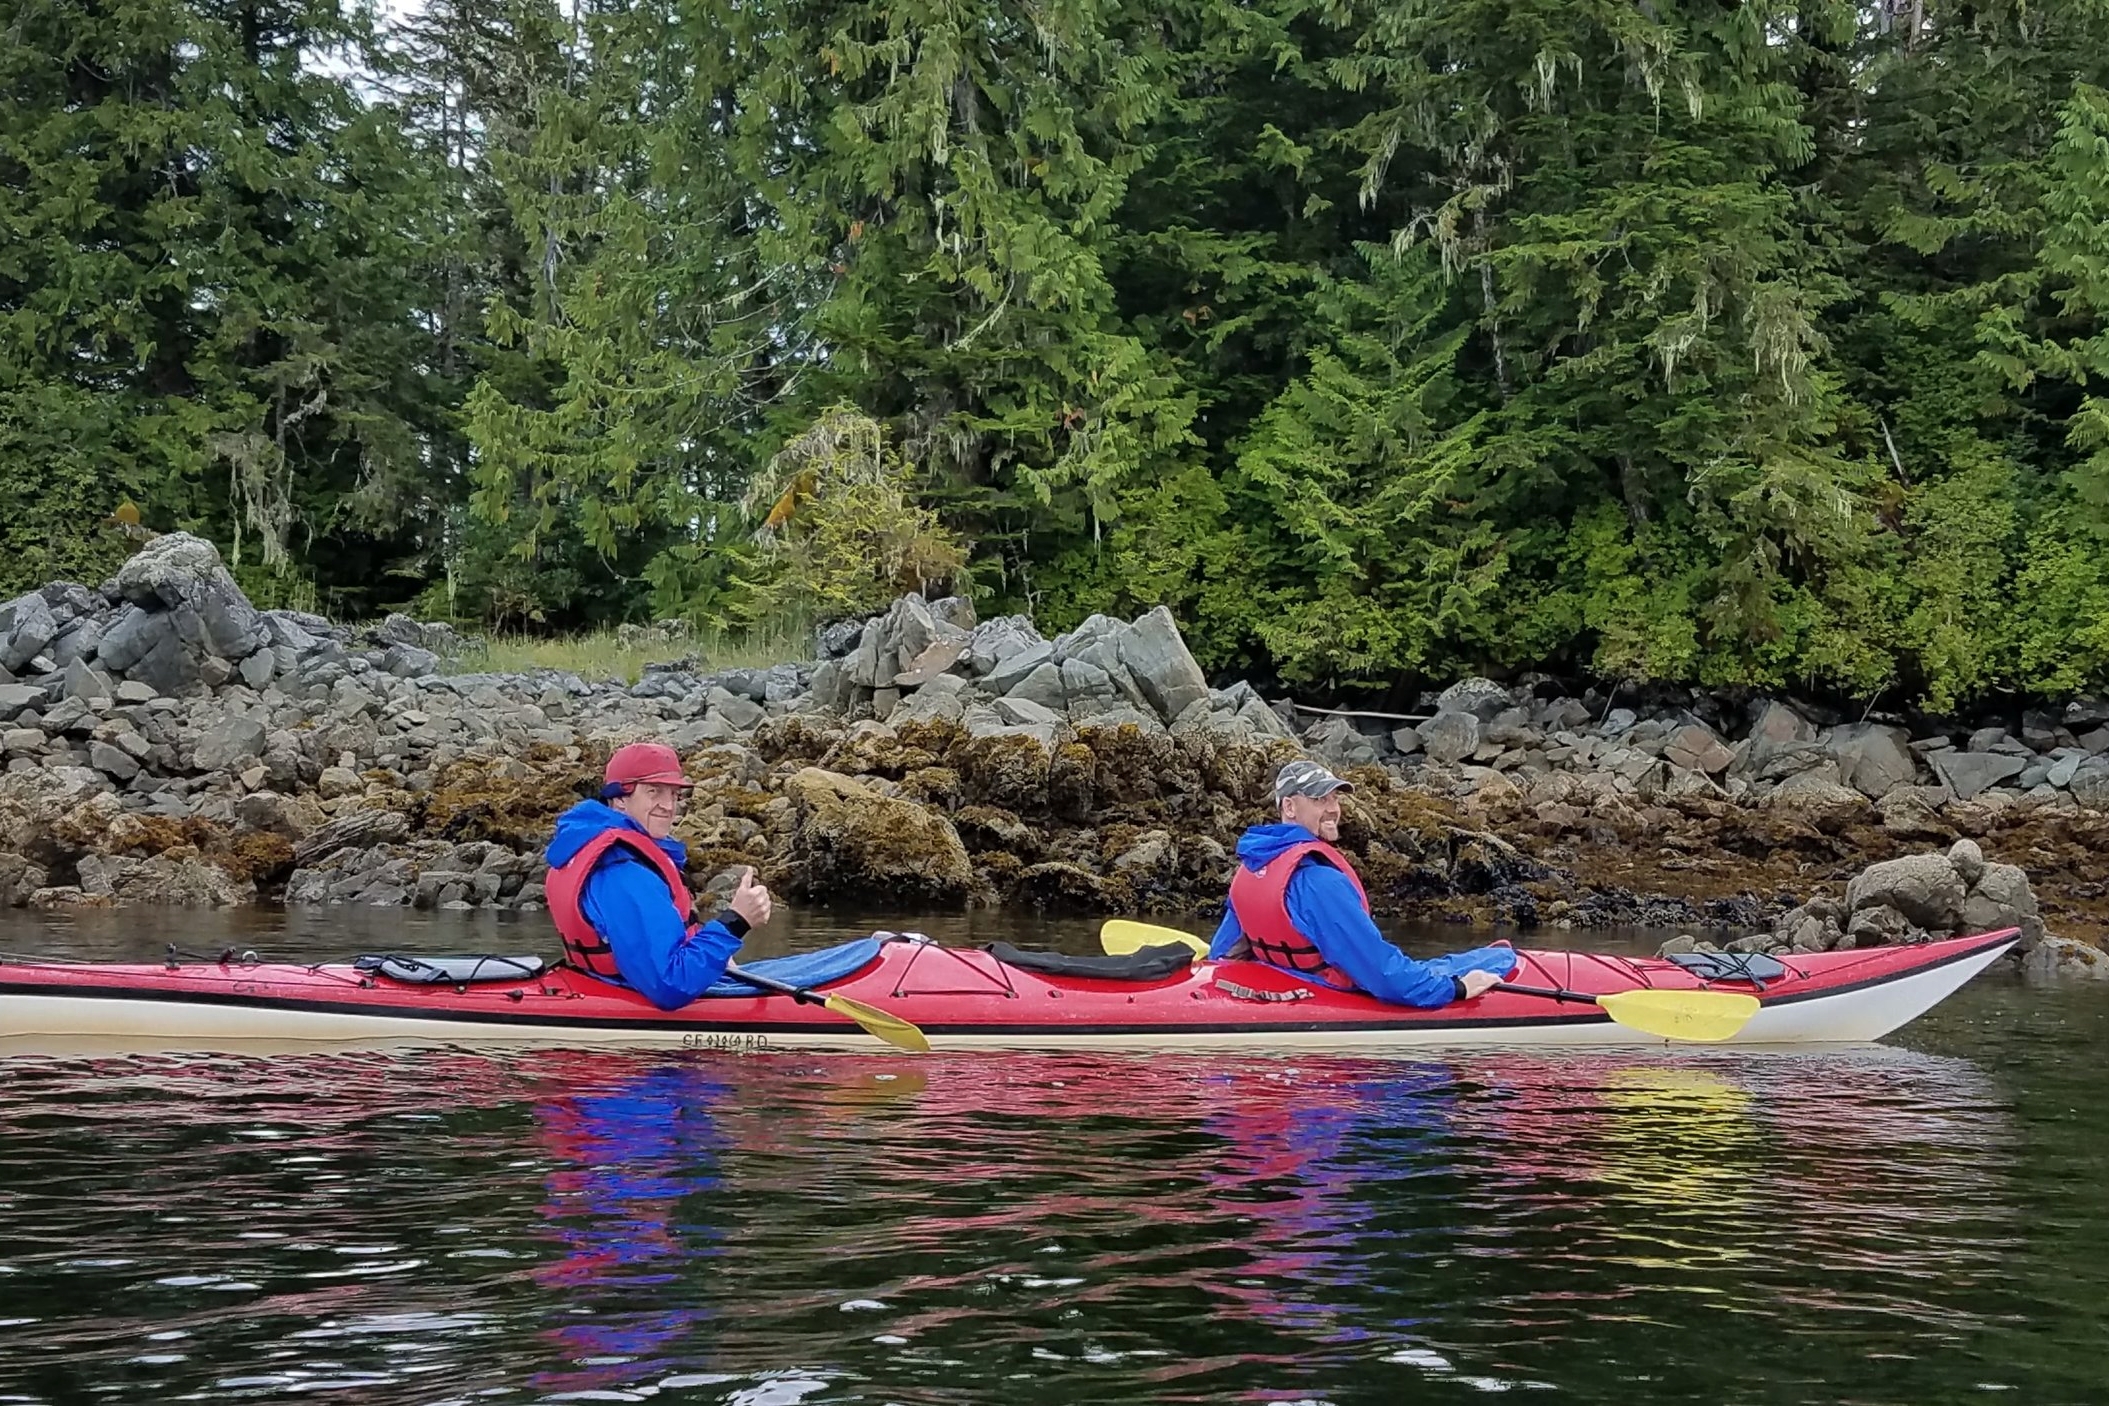  Enjoying the sea air and rainforest shoreline at Orcas Cove.  